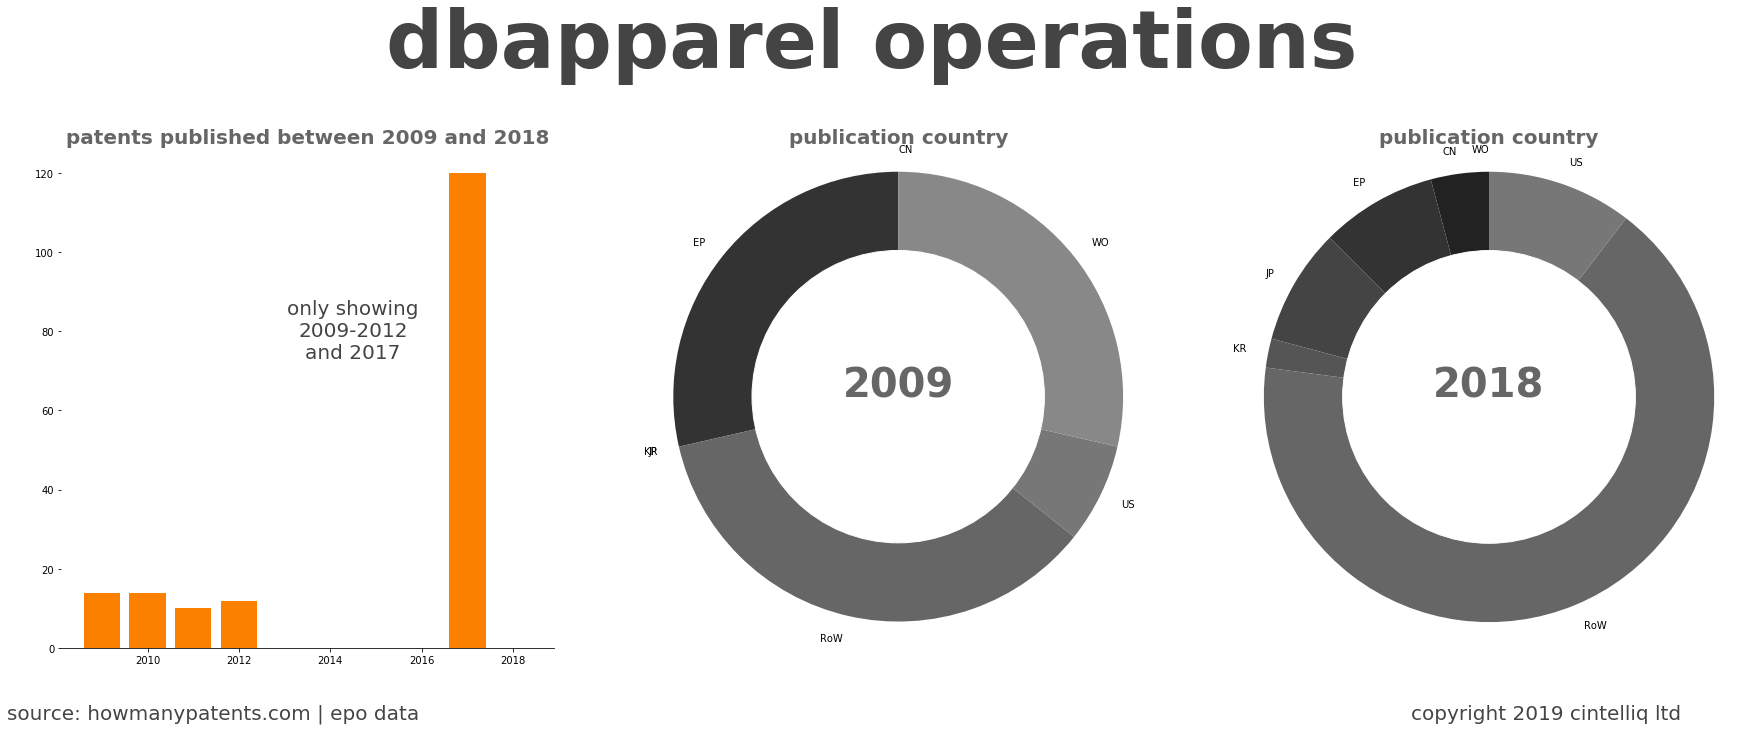 summary of patents for Dbapparel Operations